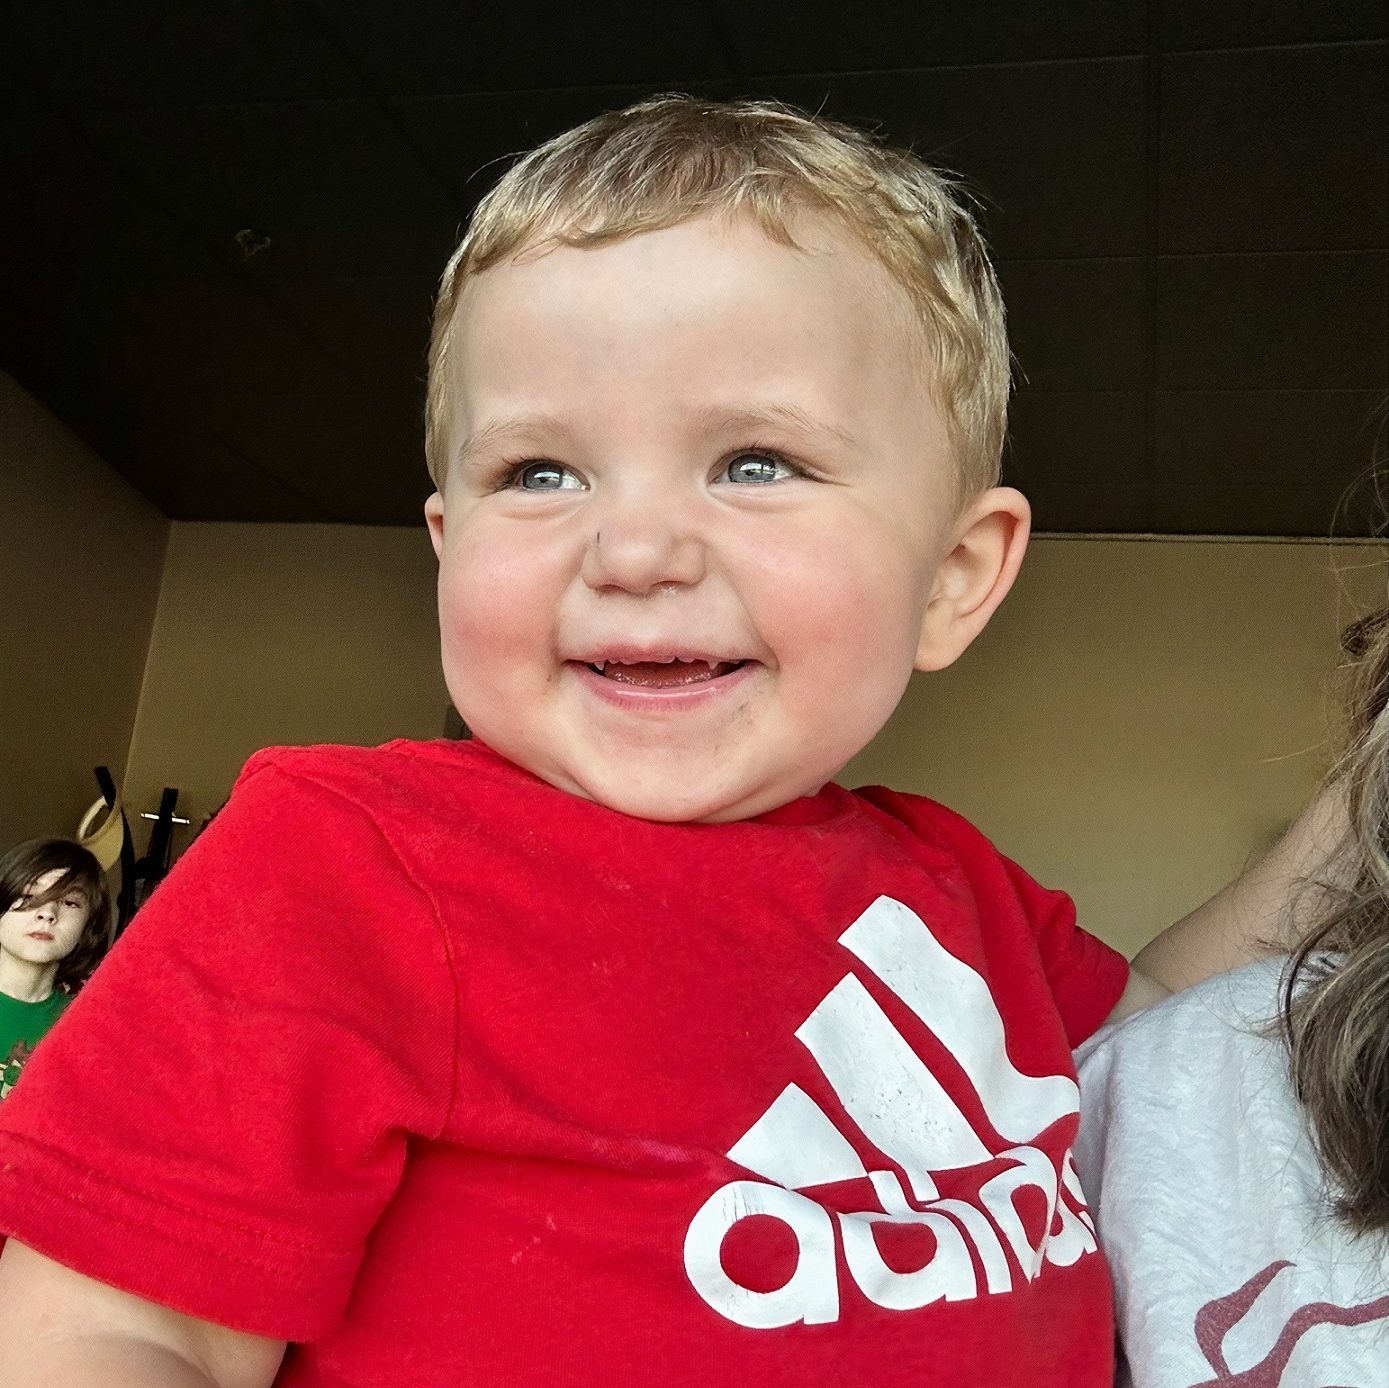 young boy in an Adidas t-shirt smiling while being held